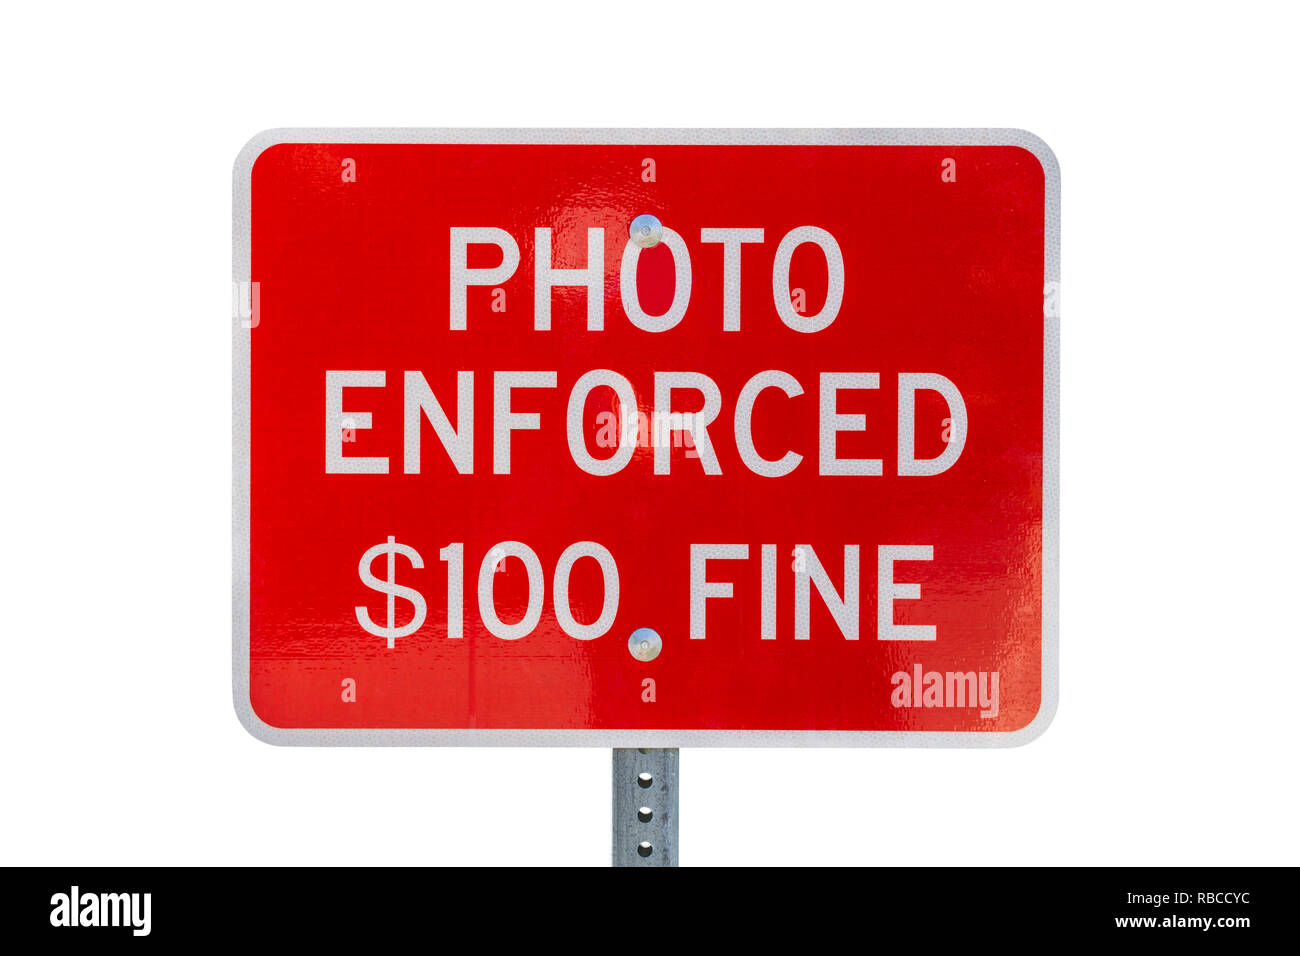 Photo enforced $100 fine stop sign warning notice isolated on white. Stock Photo